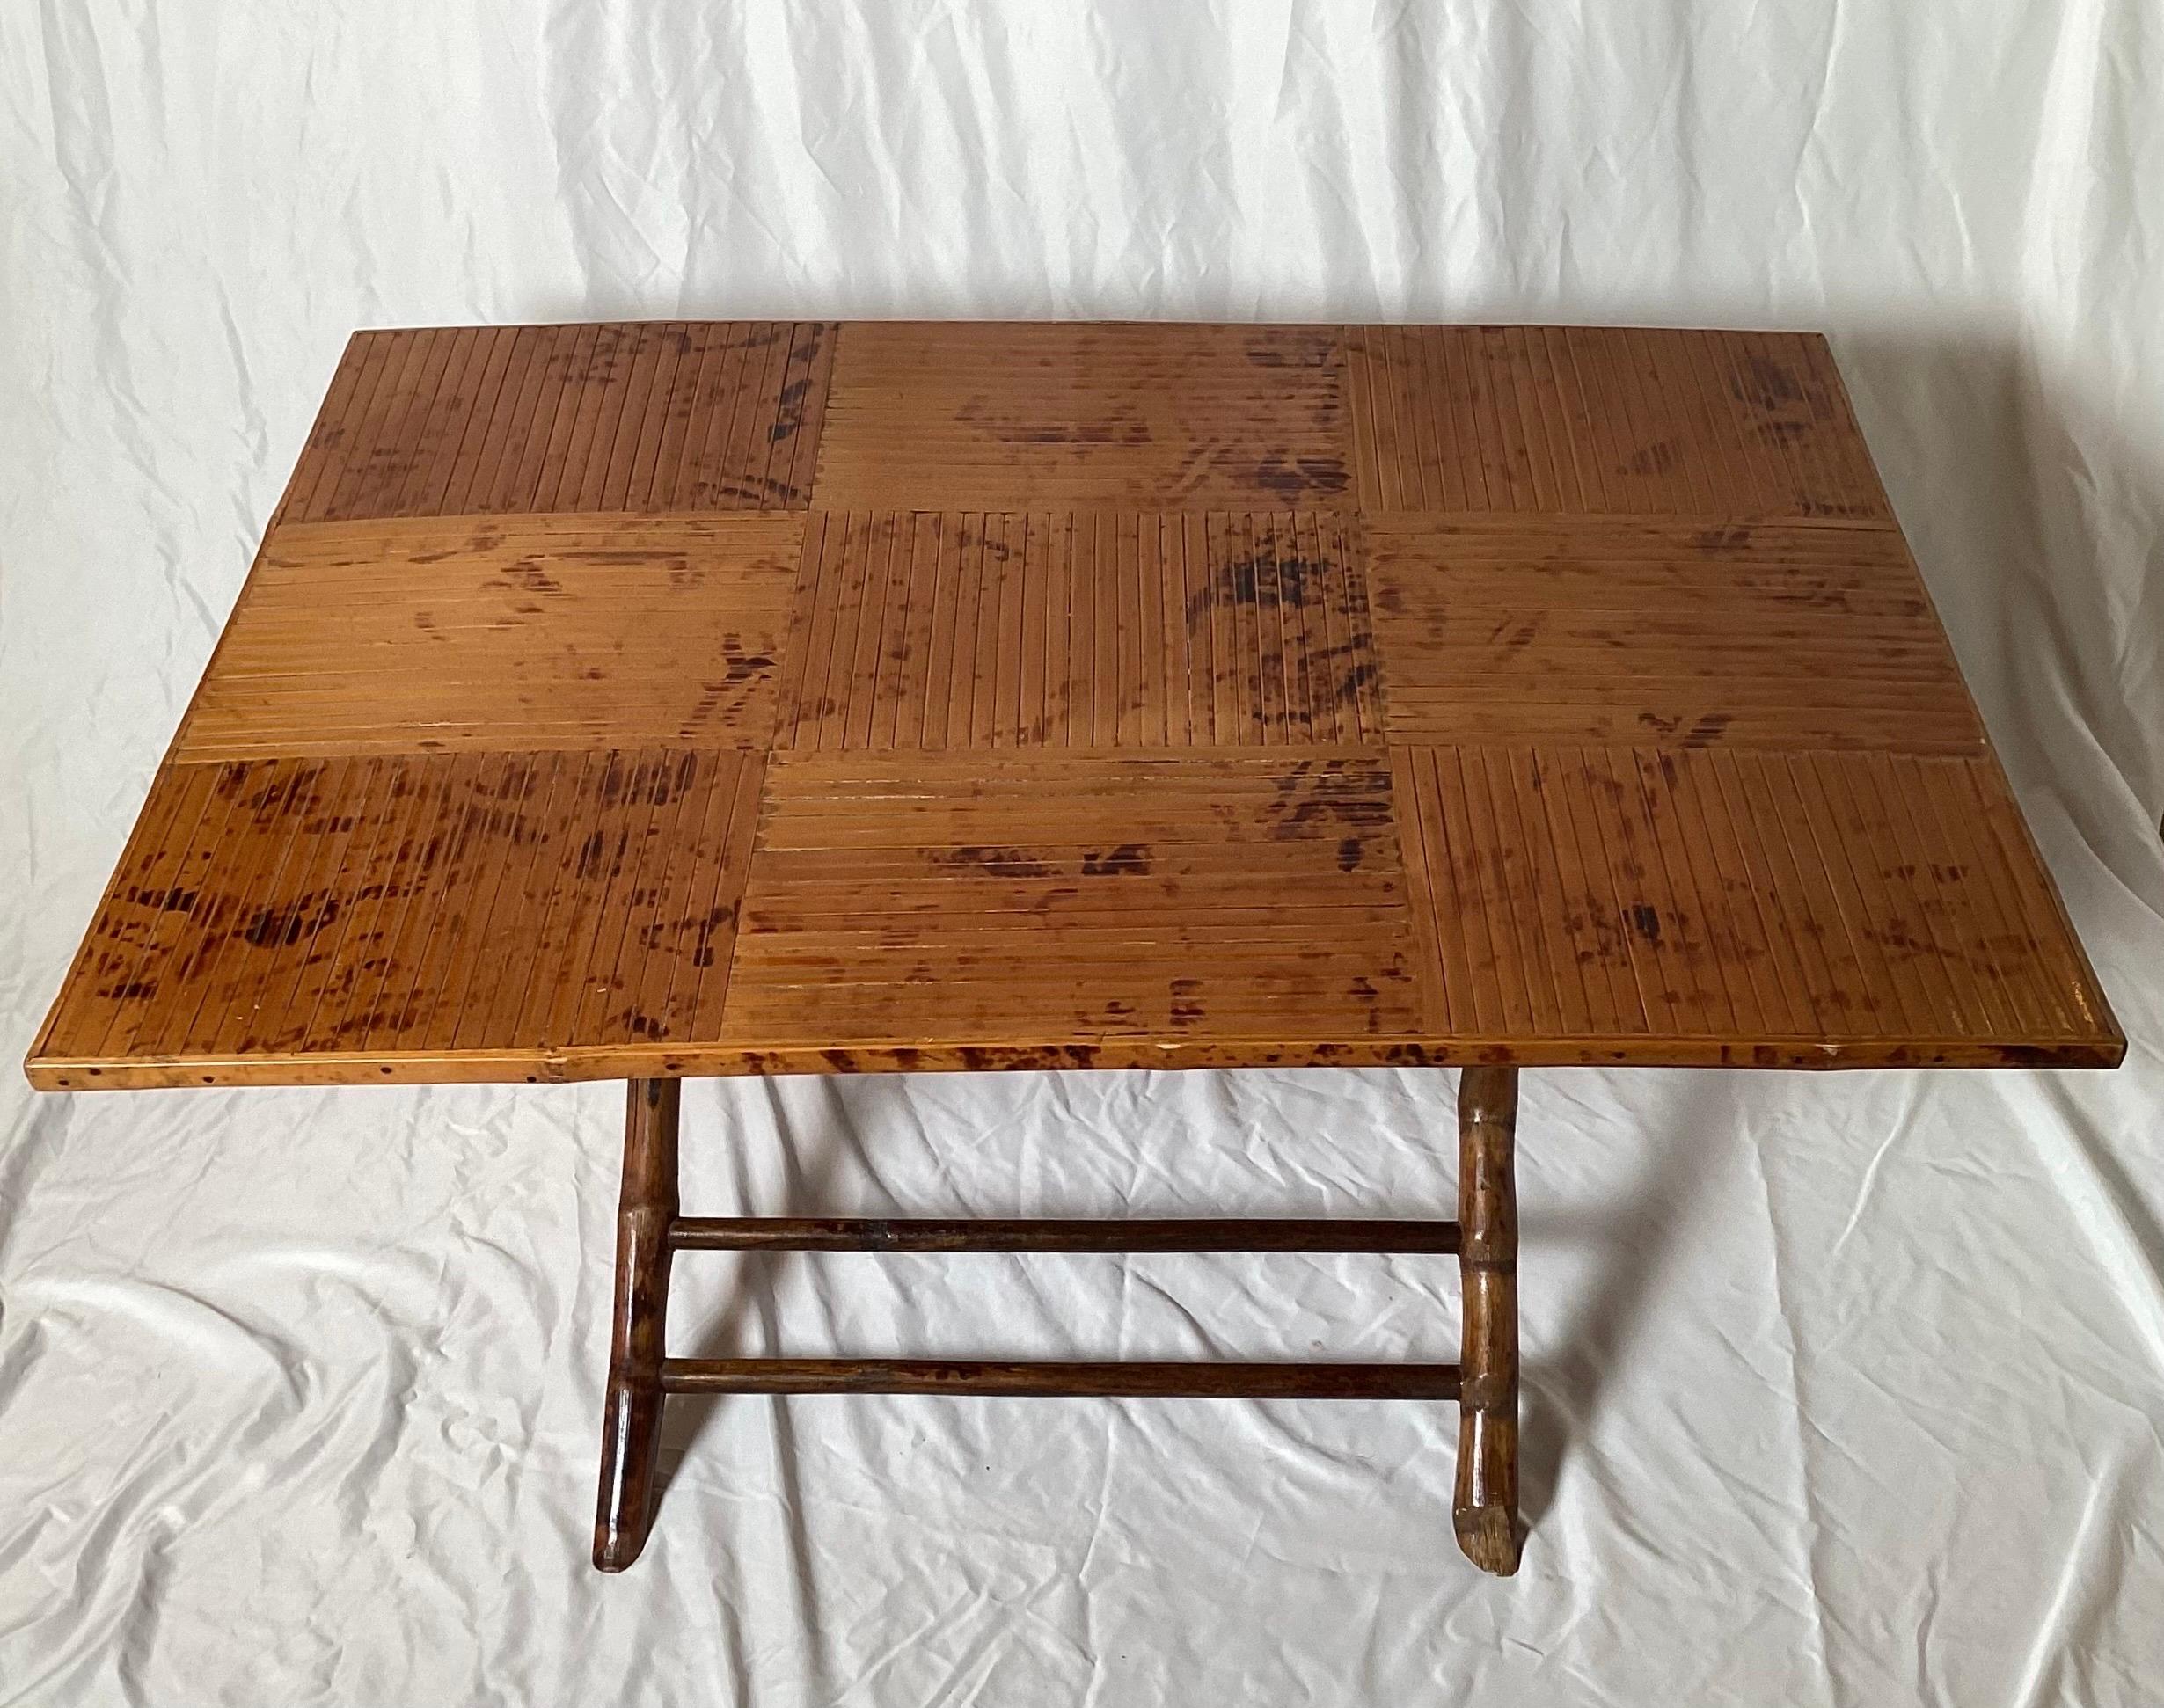 A beautiful split bamboo folding cocktail table, USA 1960's, the surface has been professionally polished, in excellent condition.  The table  measuring 17 inches tall, 36 inches wide, 26 inched deep when open, folded is 36 wide, 26 high 5 deep for